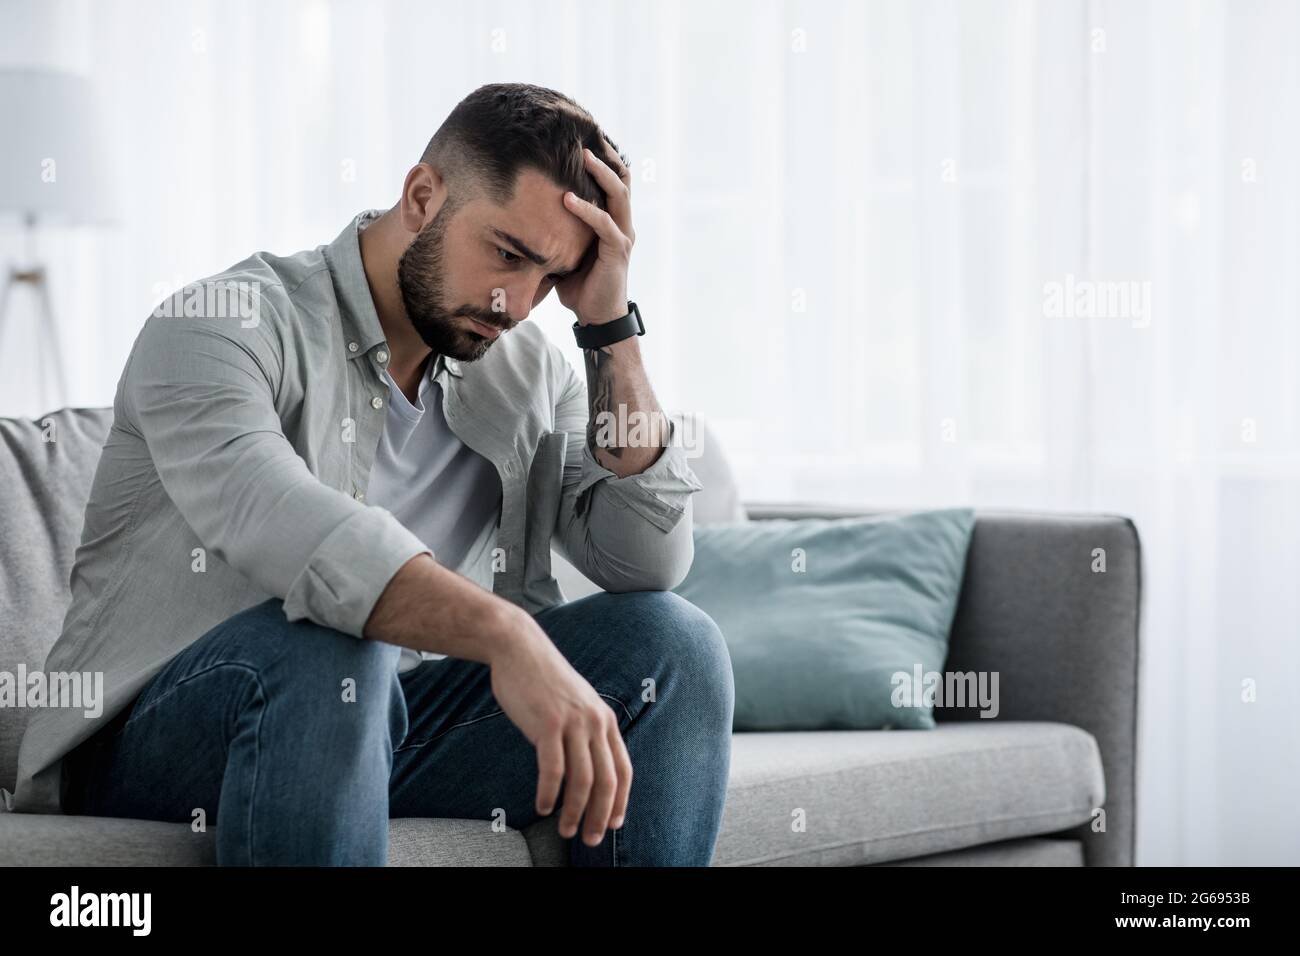 Attractive guy feeling desperately, sad, looking worried depressed thoughtful and lonely Stock Photo